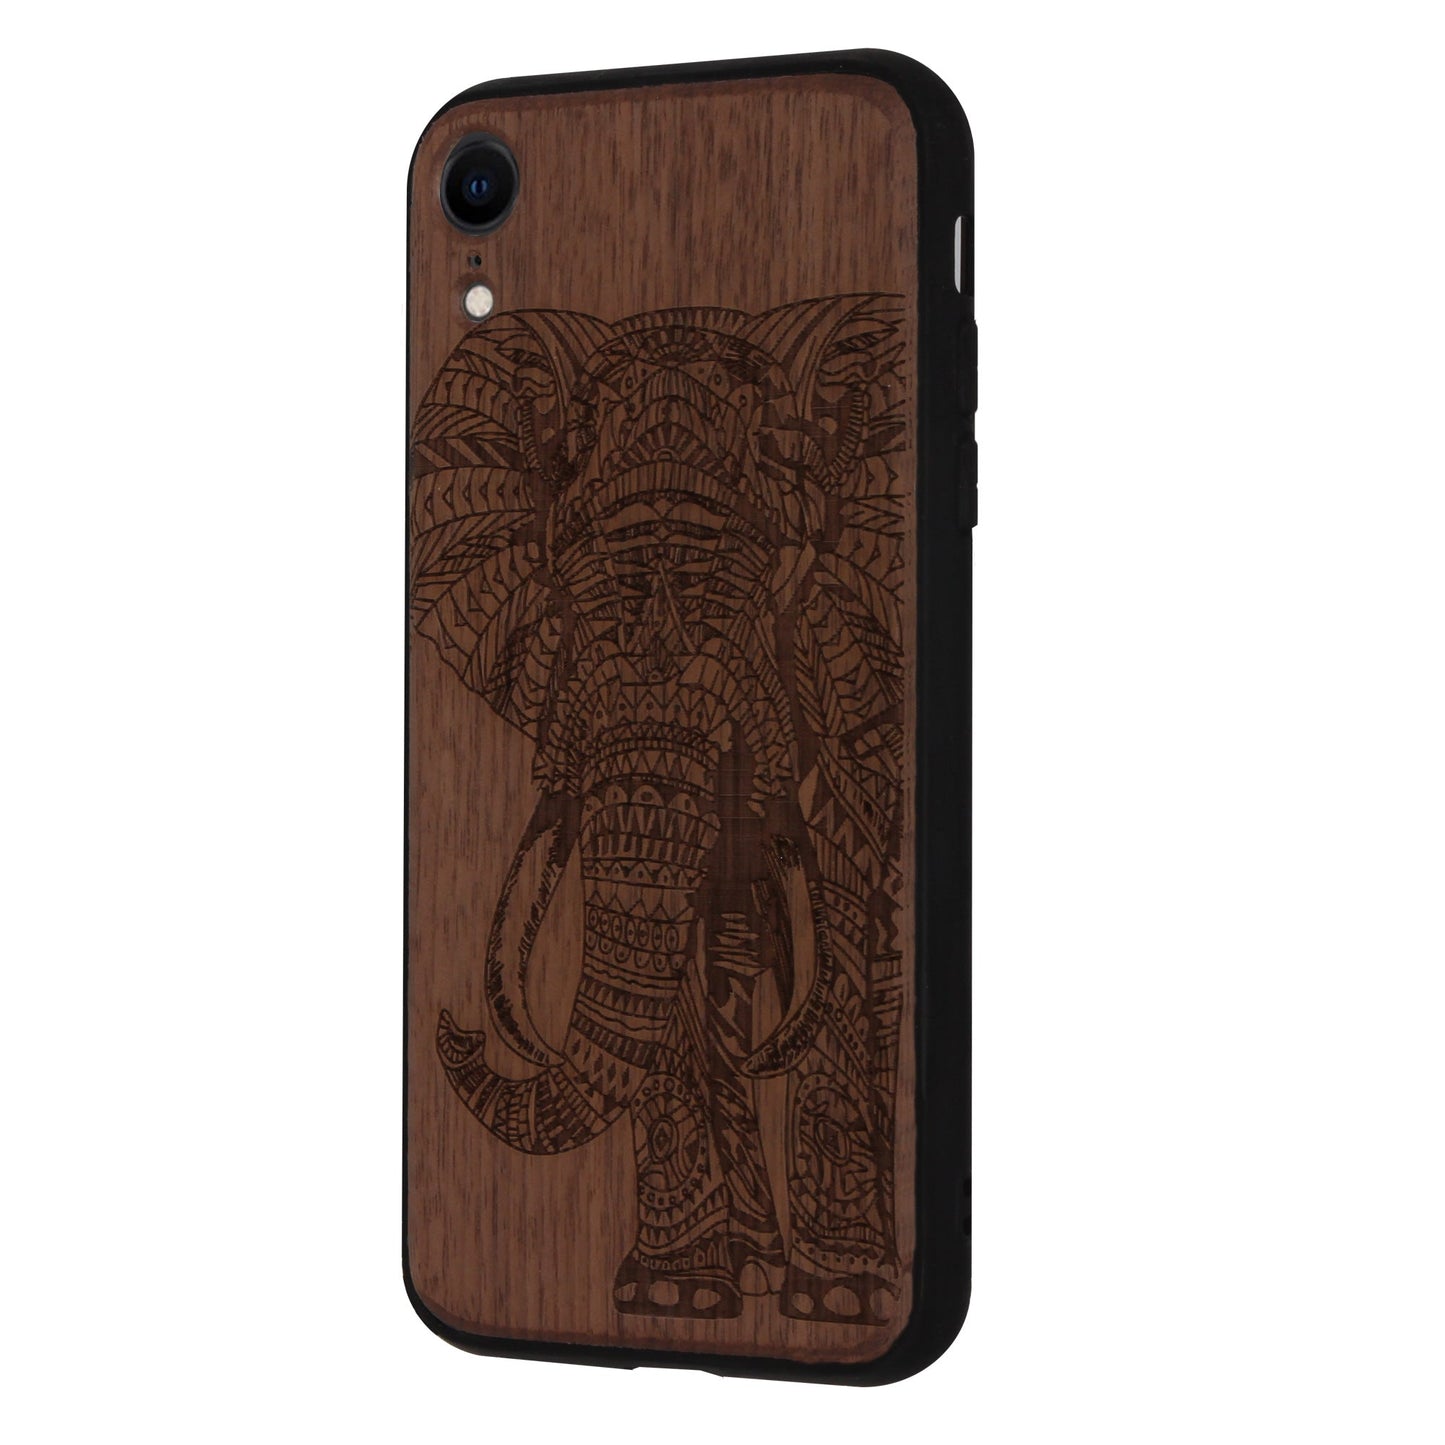 Elephant Eden case for iPhone XR made of walnut wood